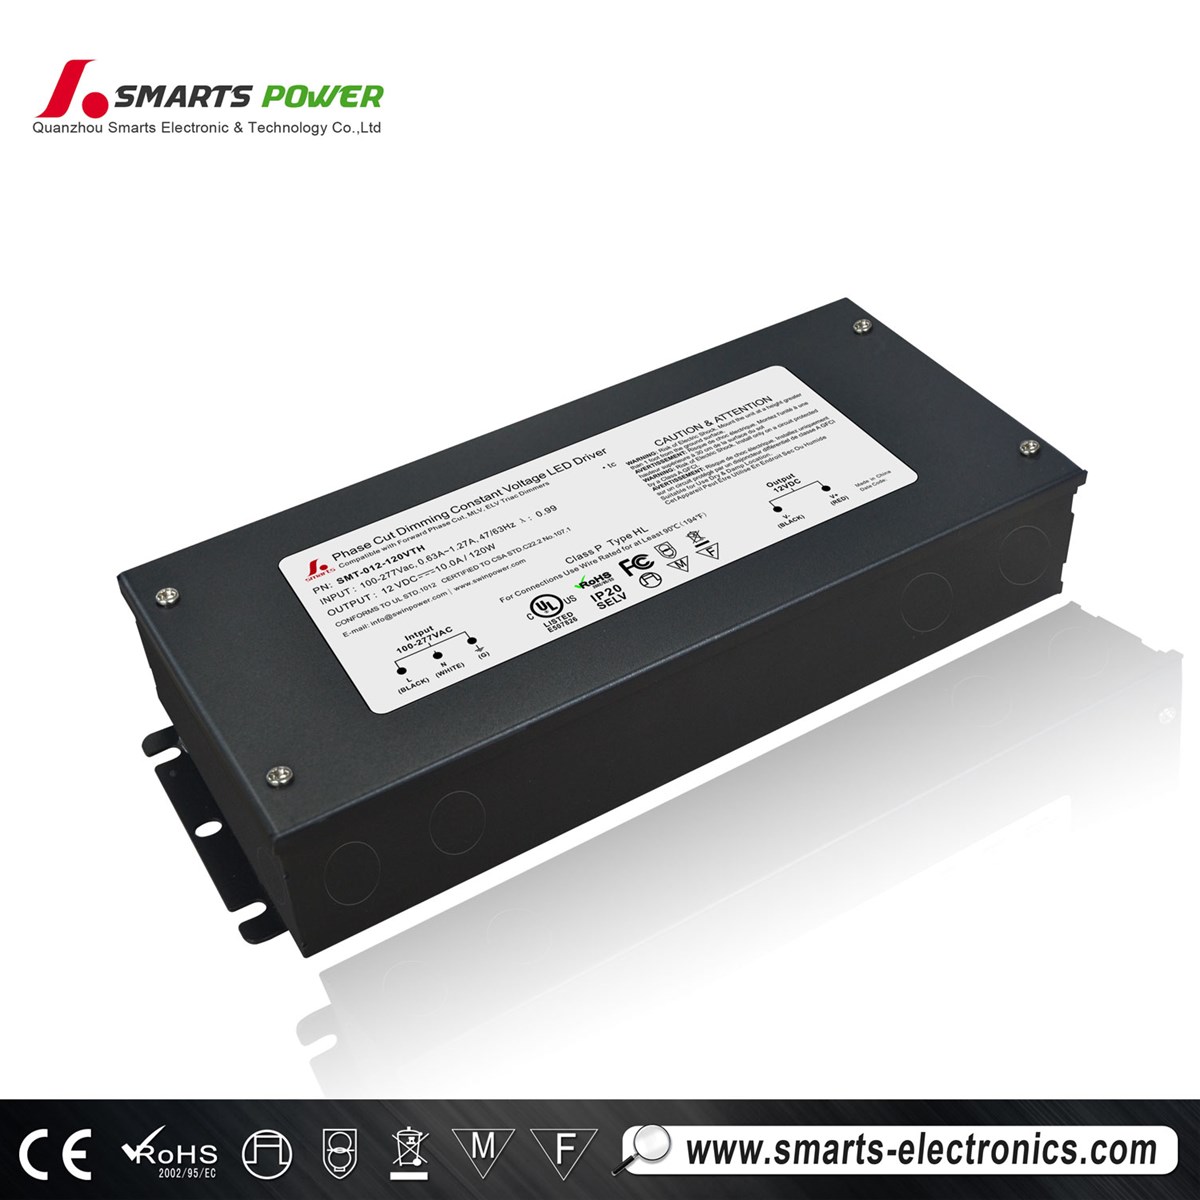 12v 120w Triac Dimming Led Driver With ETL Listed For LED Strip